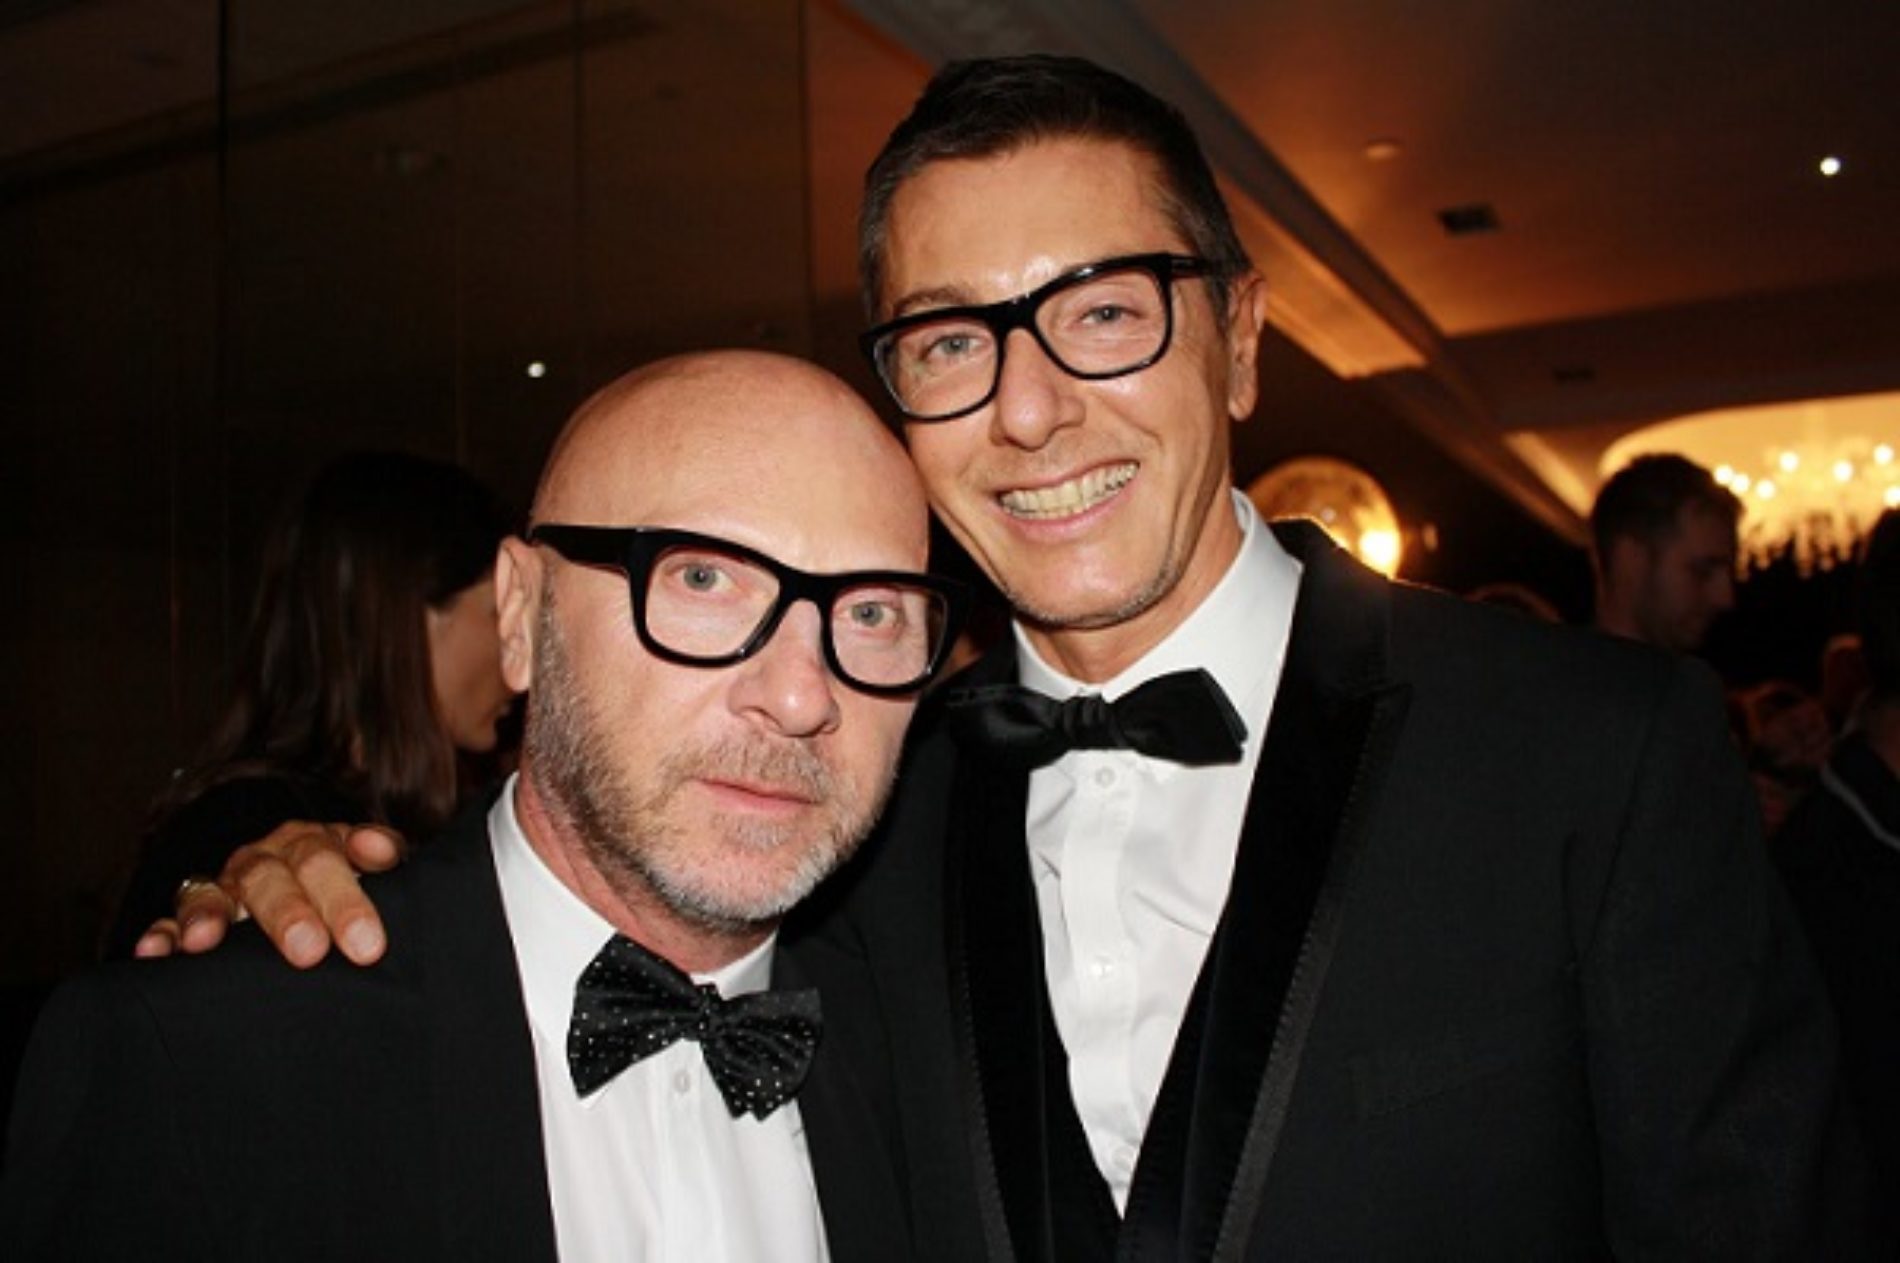 Gabbana once asked his friend to be a surrogate mother, before criticism of ‘non-traditional’ families